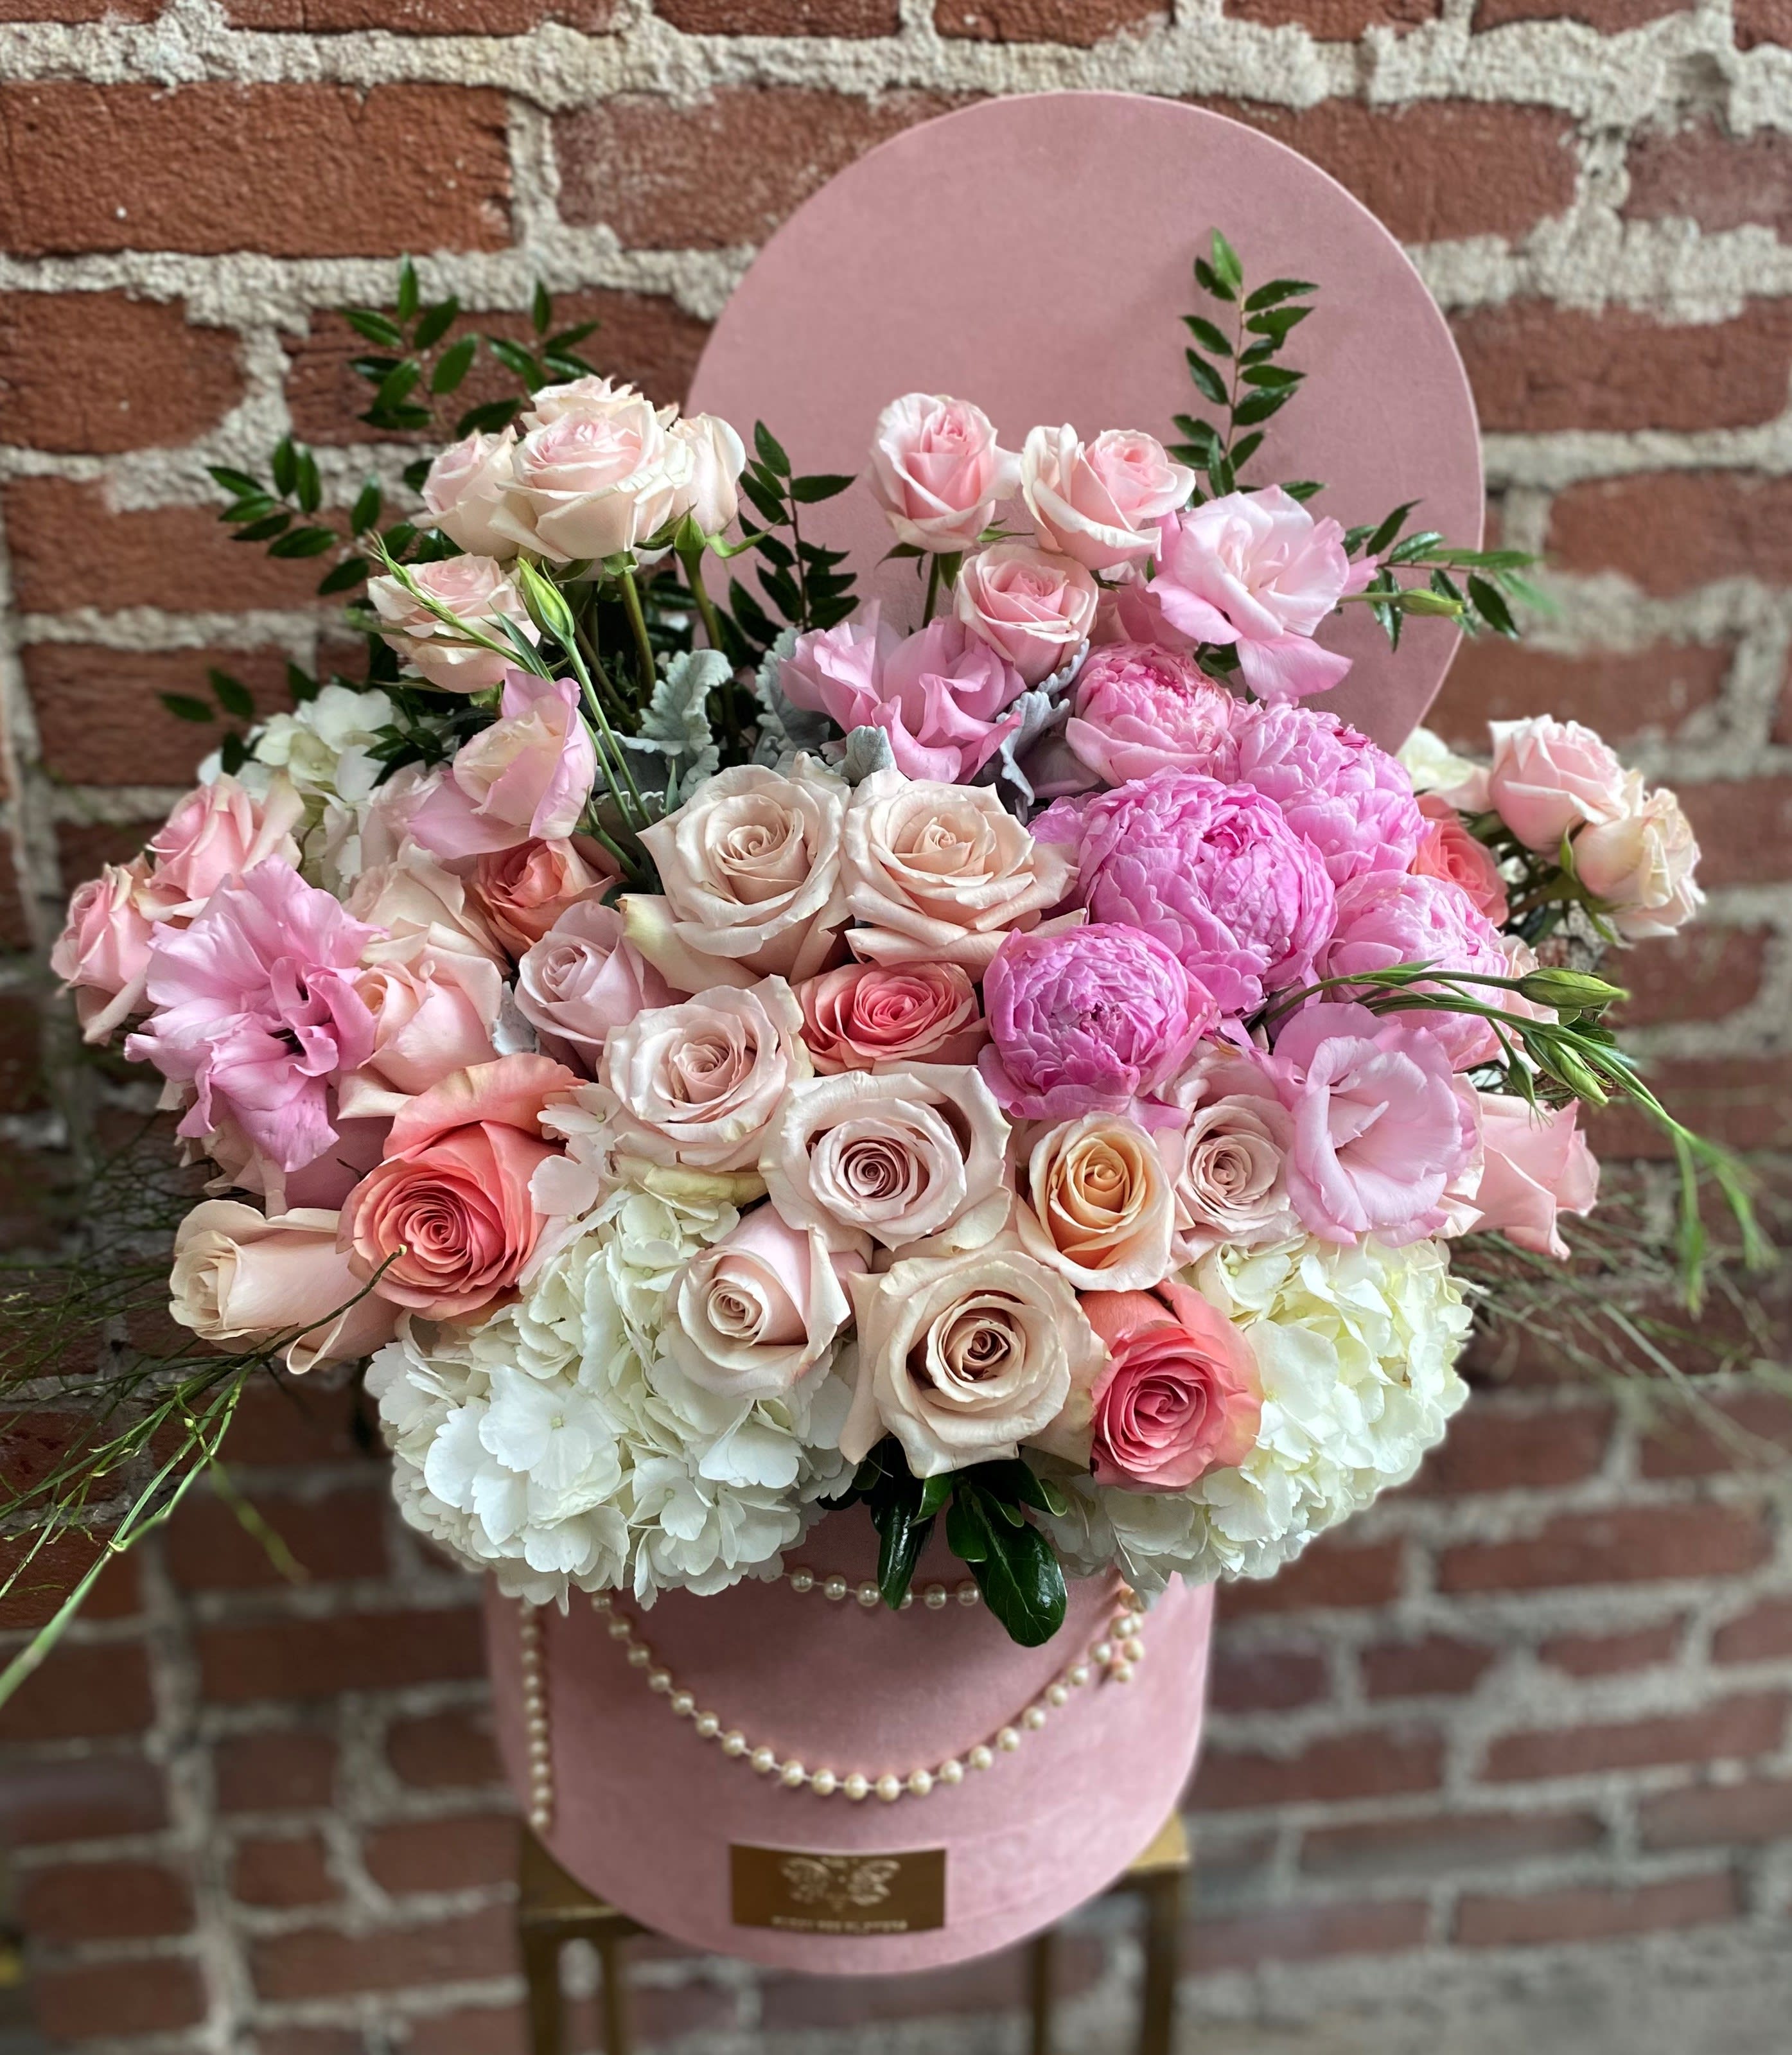 Roses meet Peonies - This beautiful arrangement is designed to deliver happiness to a loved ones day. Filled with beautiful Roses, Peonies and customized to perfection, this arrangement is a showstopper! If you want to turn heads then this is the arrangement for you!